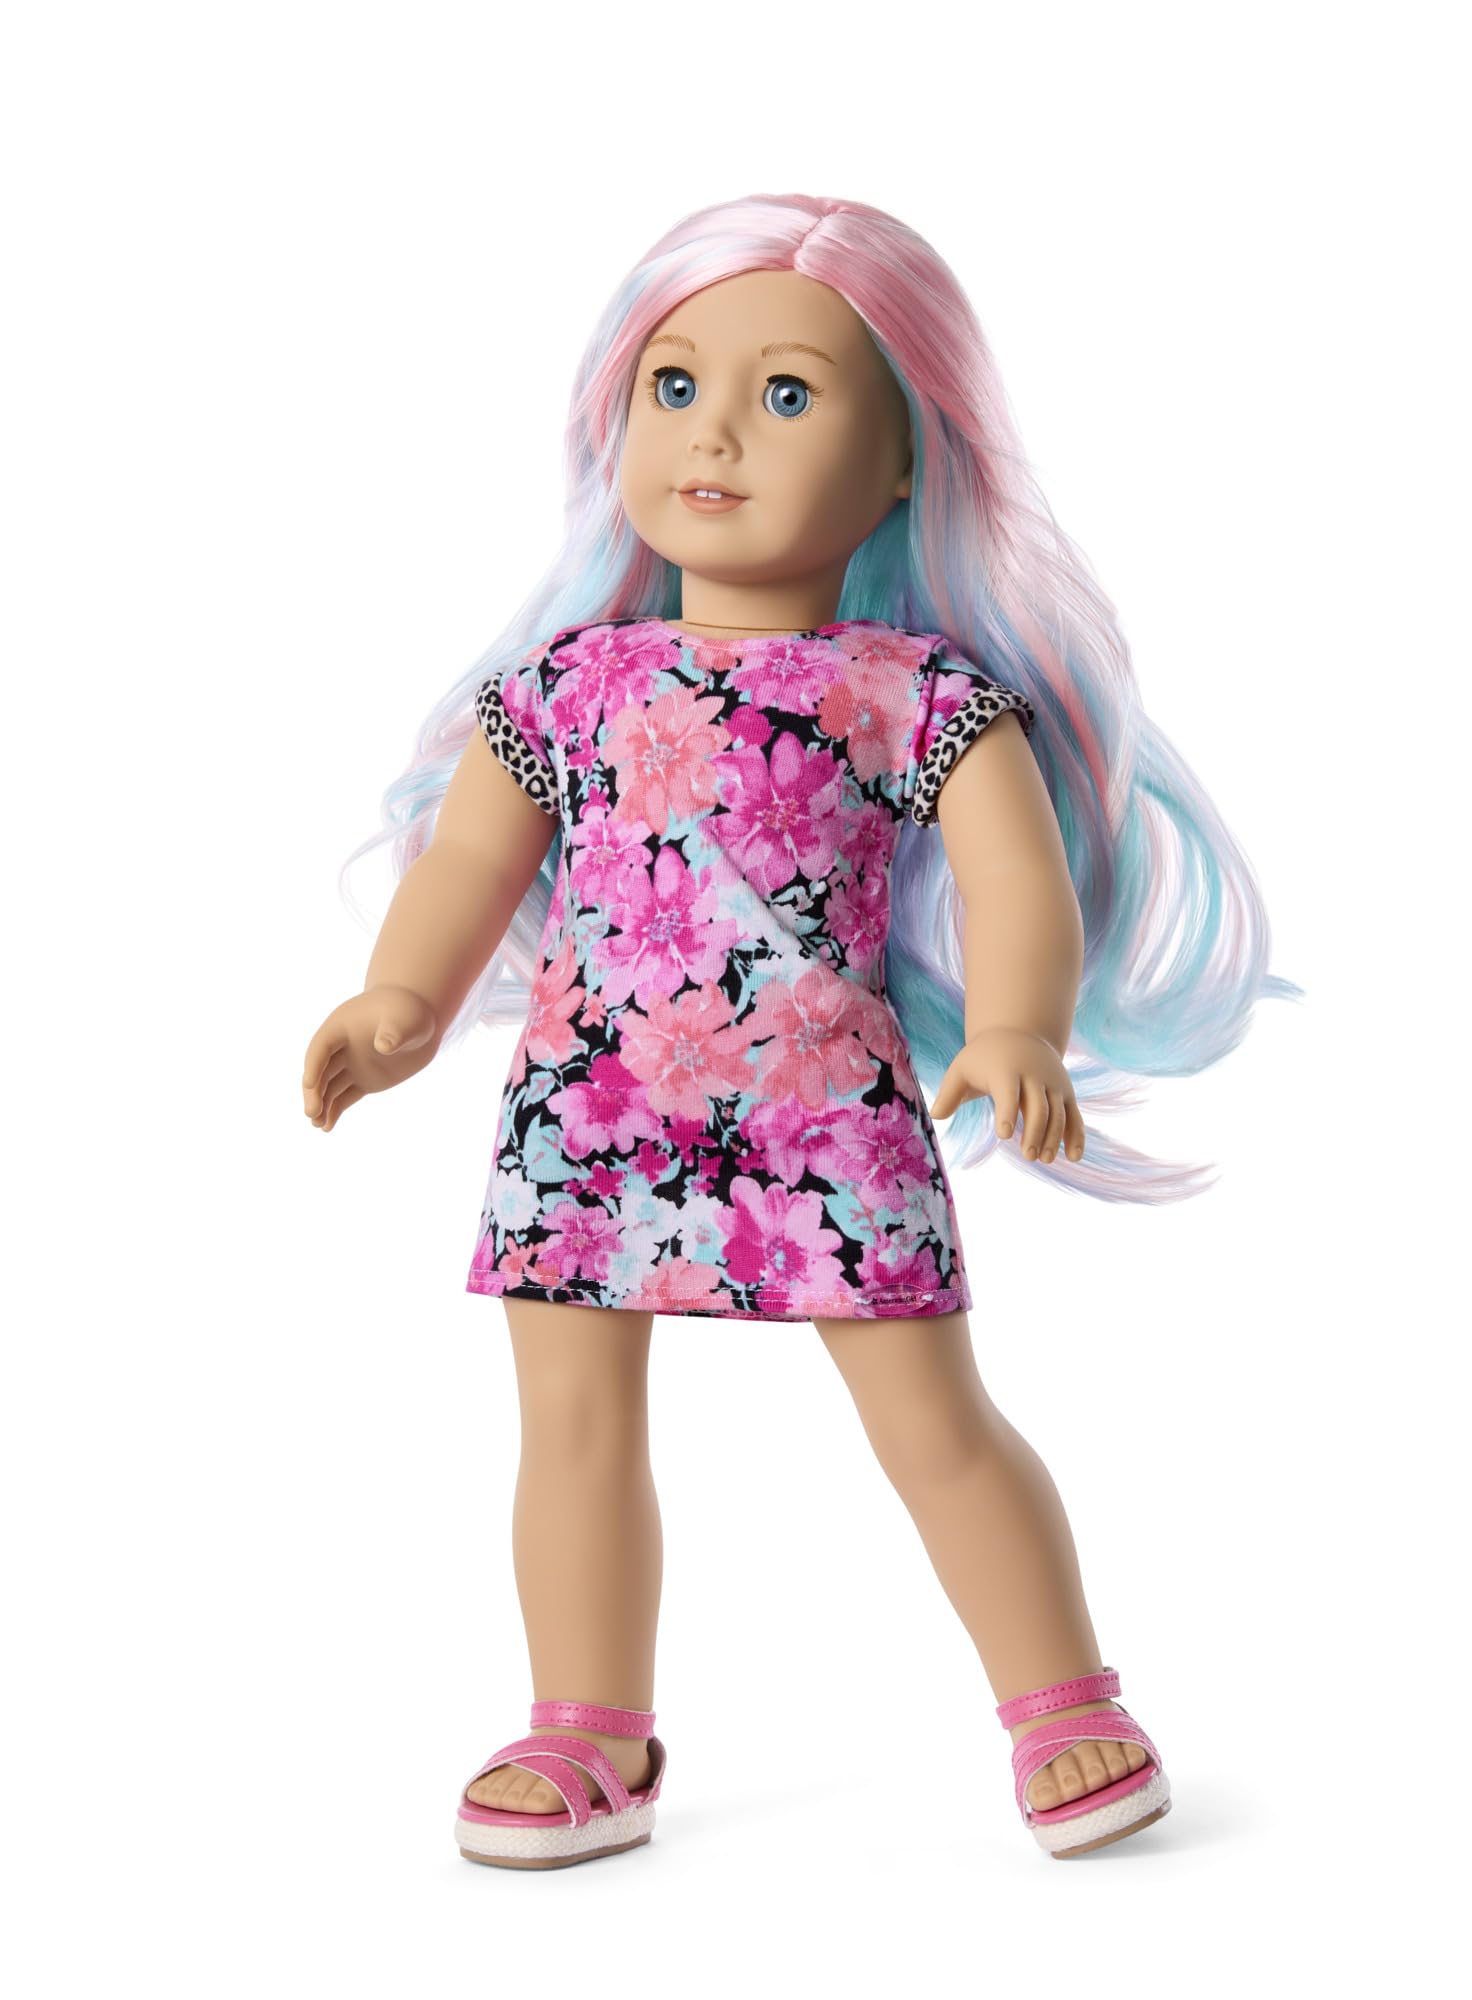 American Girl Truly Me 18-inch Doll #129 with Lt Blue Eyes, Multicolor Hair, Lt Skin with Warm Olive Undertones, for Ages 6+